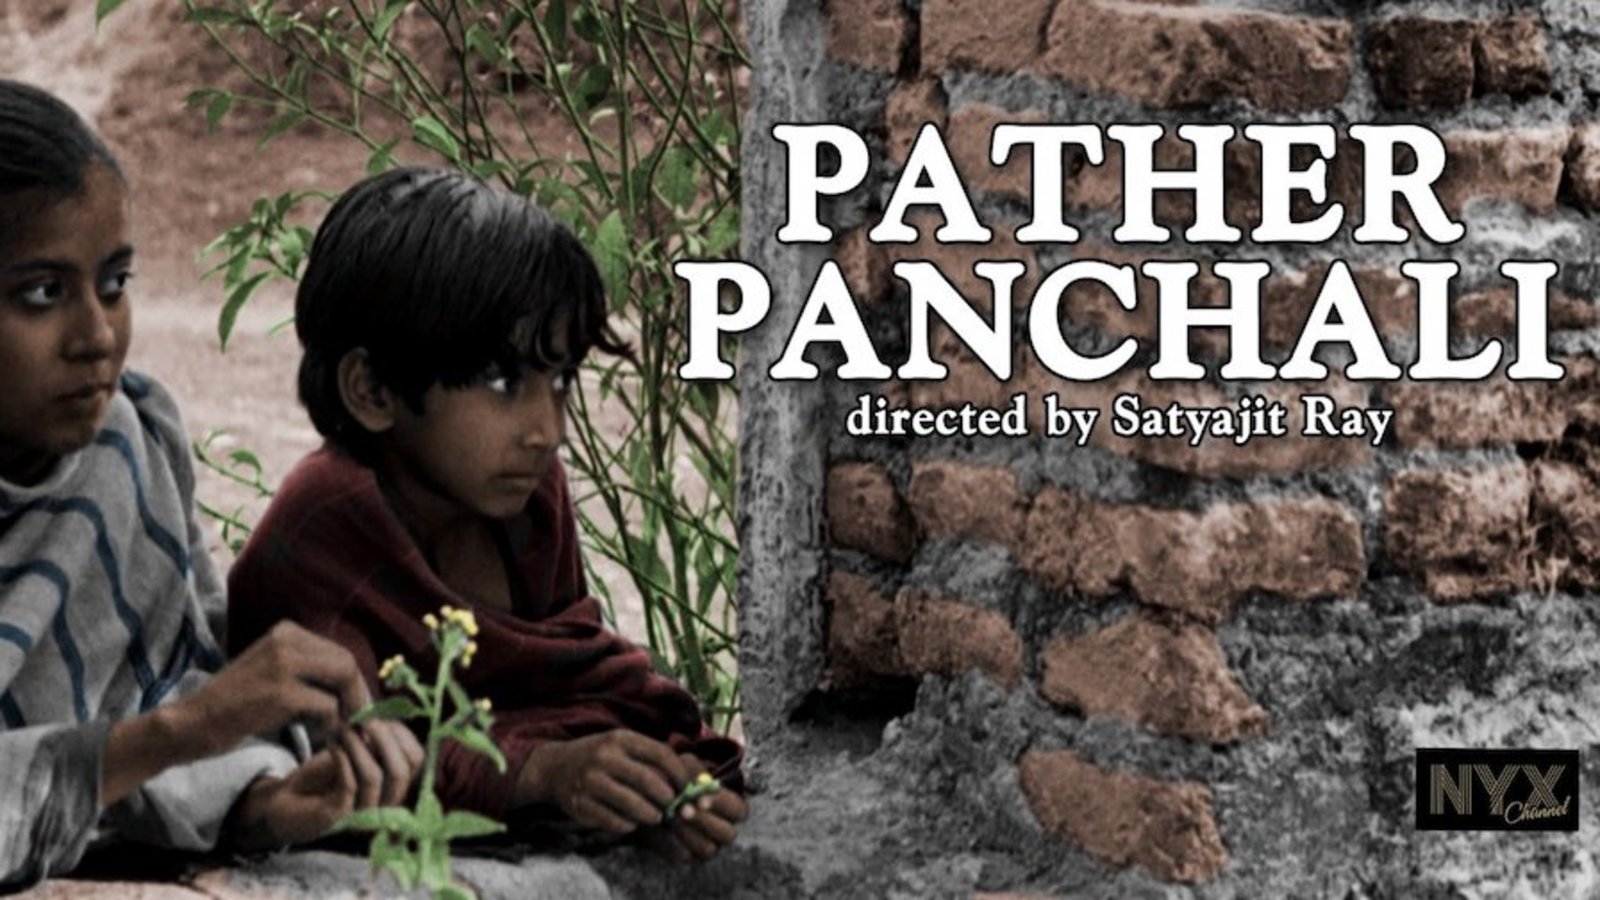 pather panchali meaning